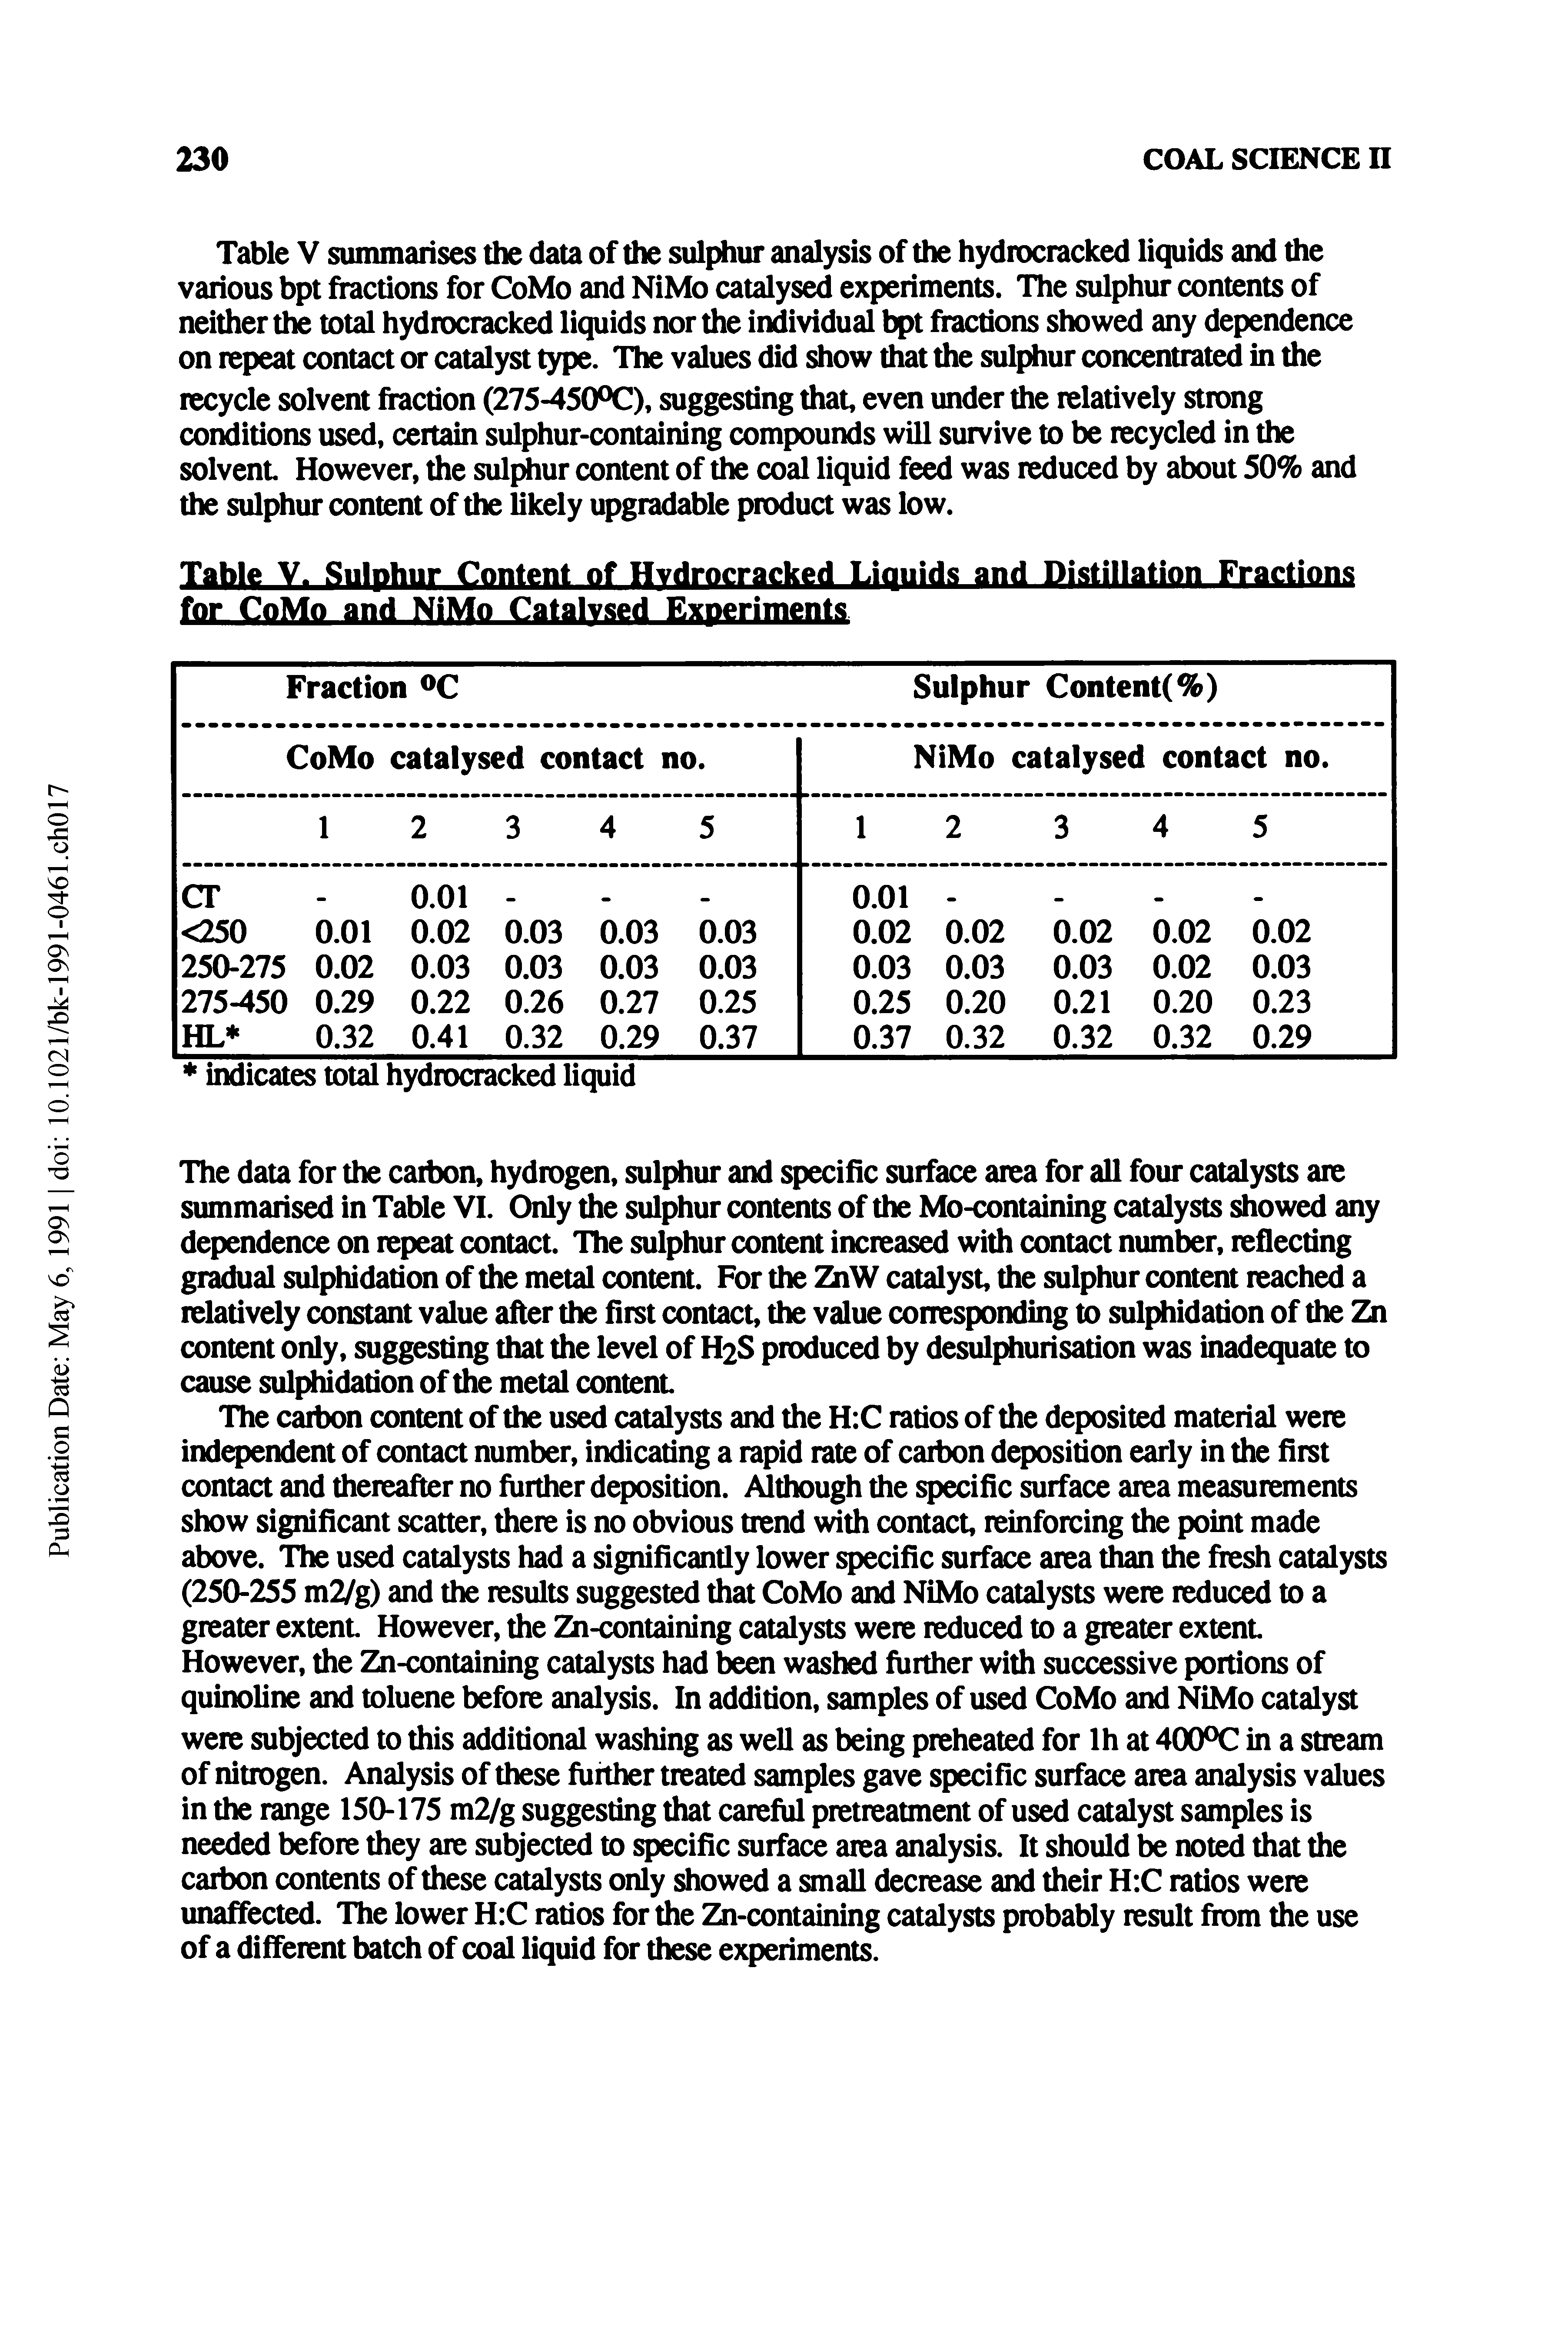 Table V summarises the data of the sulphur analysis of the hydrocracked liquids and the various bpt fractions for CoMo and NiMo catalysed experiments. The sulphur contents of neither the total hydrocracked liquids nor the individual bpt fractions showed any dependence on repeat contact or catalyst type. The values did show that the sulphur concentrated in the recycle solvent fraction (275-450°C), suggesting that, even under the relatively strong conditions used, certain sulphur-containing compounds will survive to be recycled in the solvent However, the sulphur content of the coal liquid feed was reduced by about 50% and the sulphur content of the likely upgradable product was low.